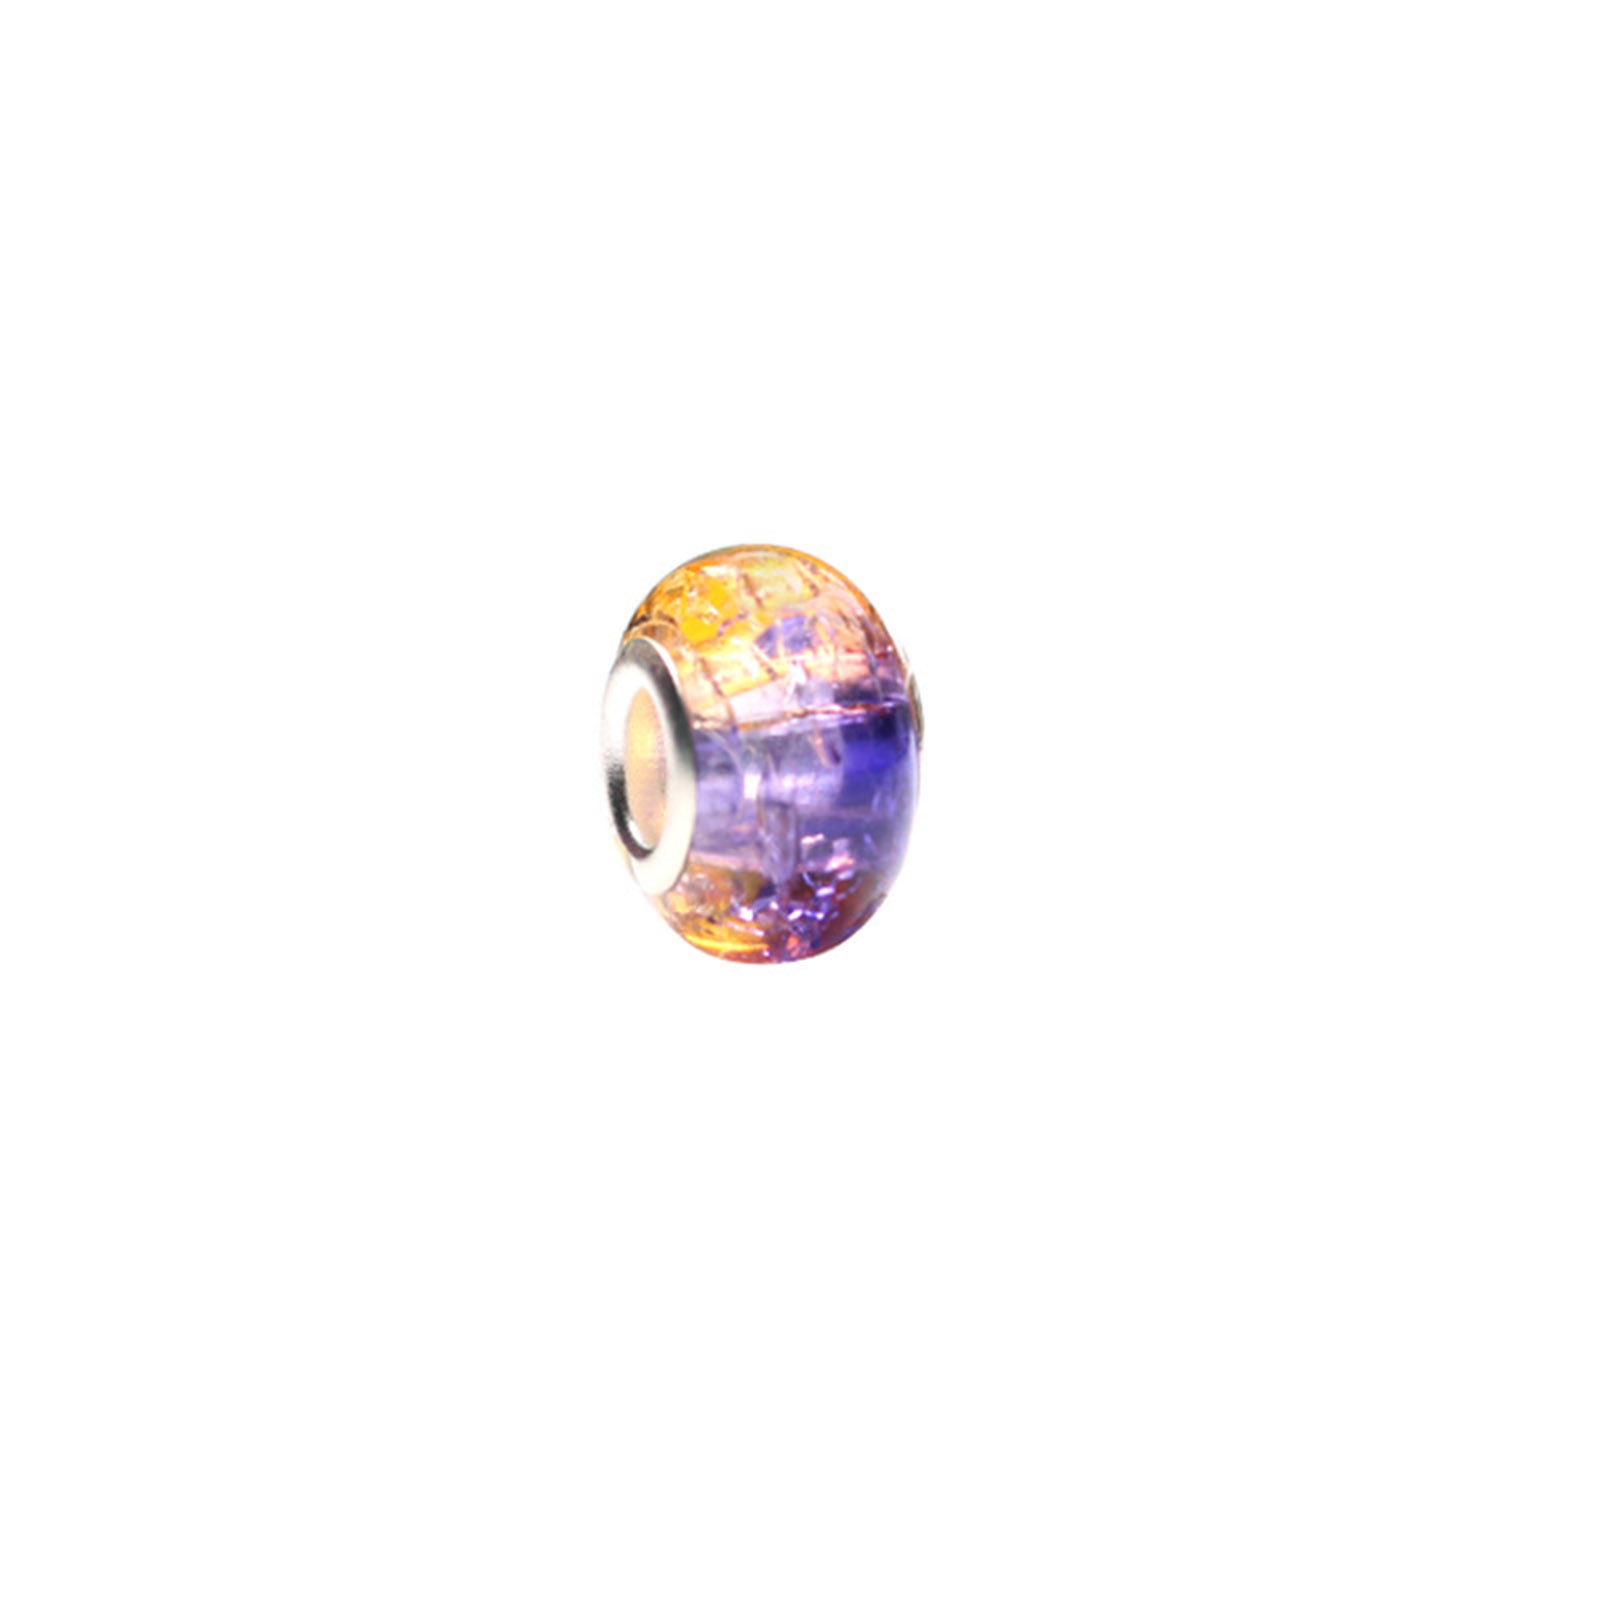 Picture of Resin European Style Large Hole Charm Beads Yellow & Purple Round Crack Gradient Color 14mm Dia., Hole: Approx 5mm, 20 PCs